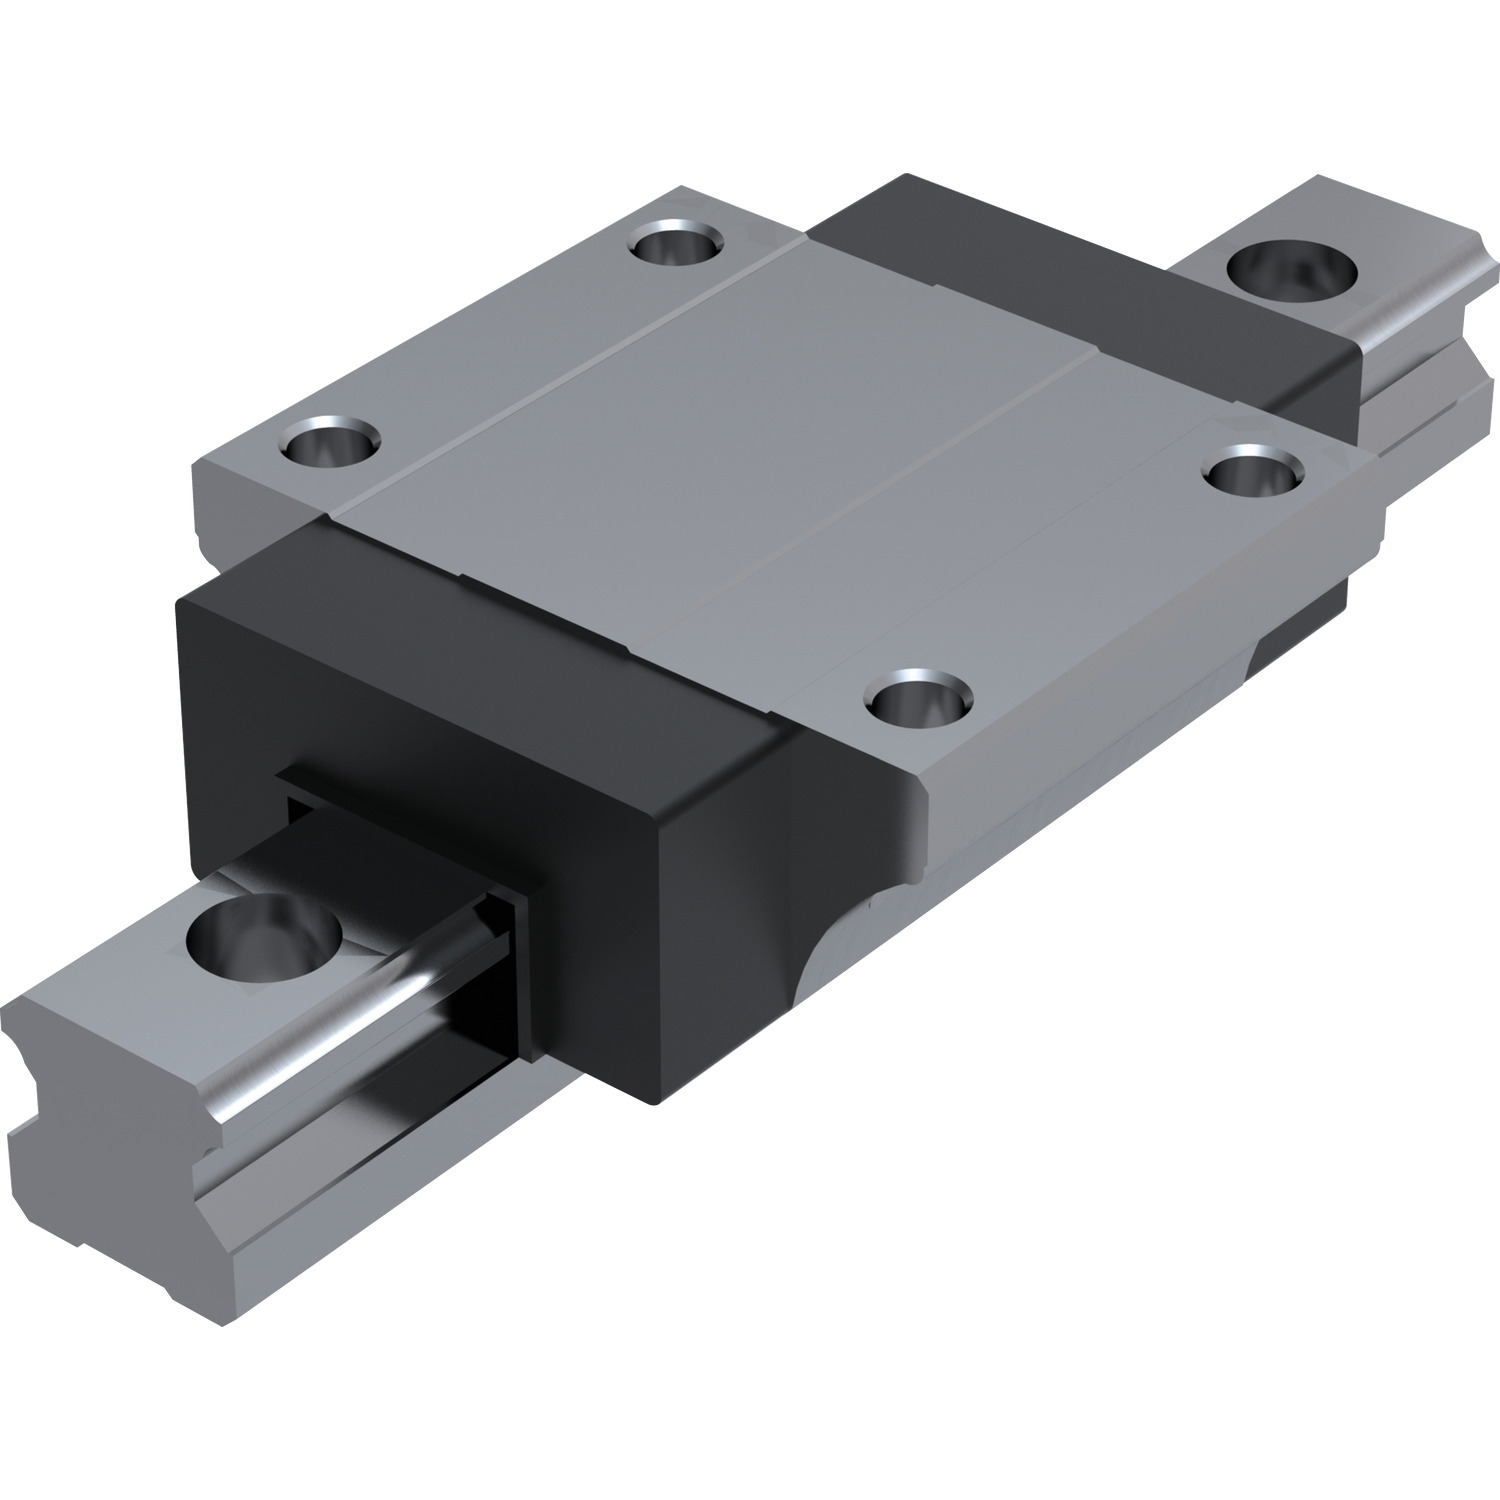 Linear Guideways Our most popular linear guideway systems with either flanged or un-flanged carriages (L1016.F or L1016.U). Width sizes 15, 20, 25, 30, 35, 45 and 55mm. Lengths up to 4 metres and rear-fixing rails also stocked (L1016.RF). Ultra-low profile carriages also available (L1016.UL).